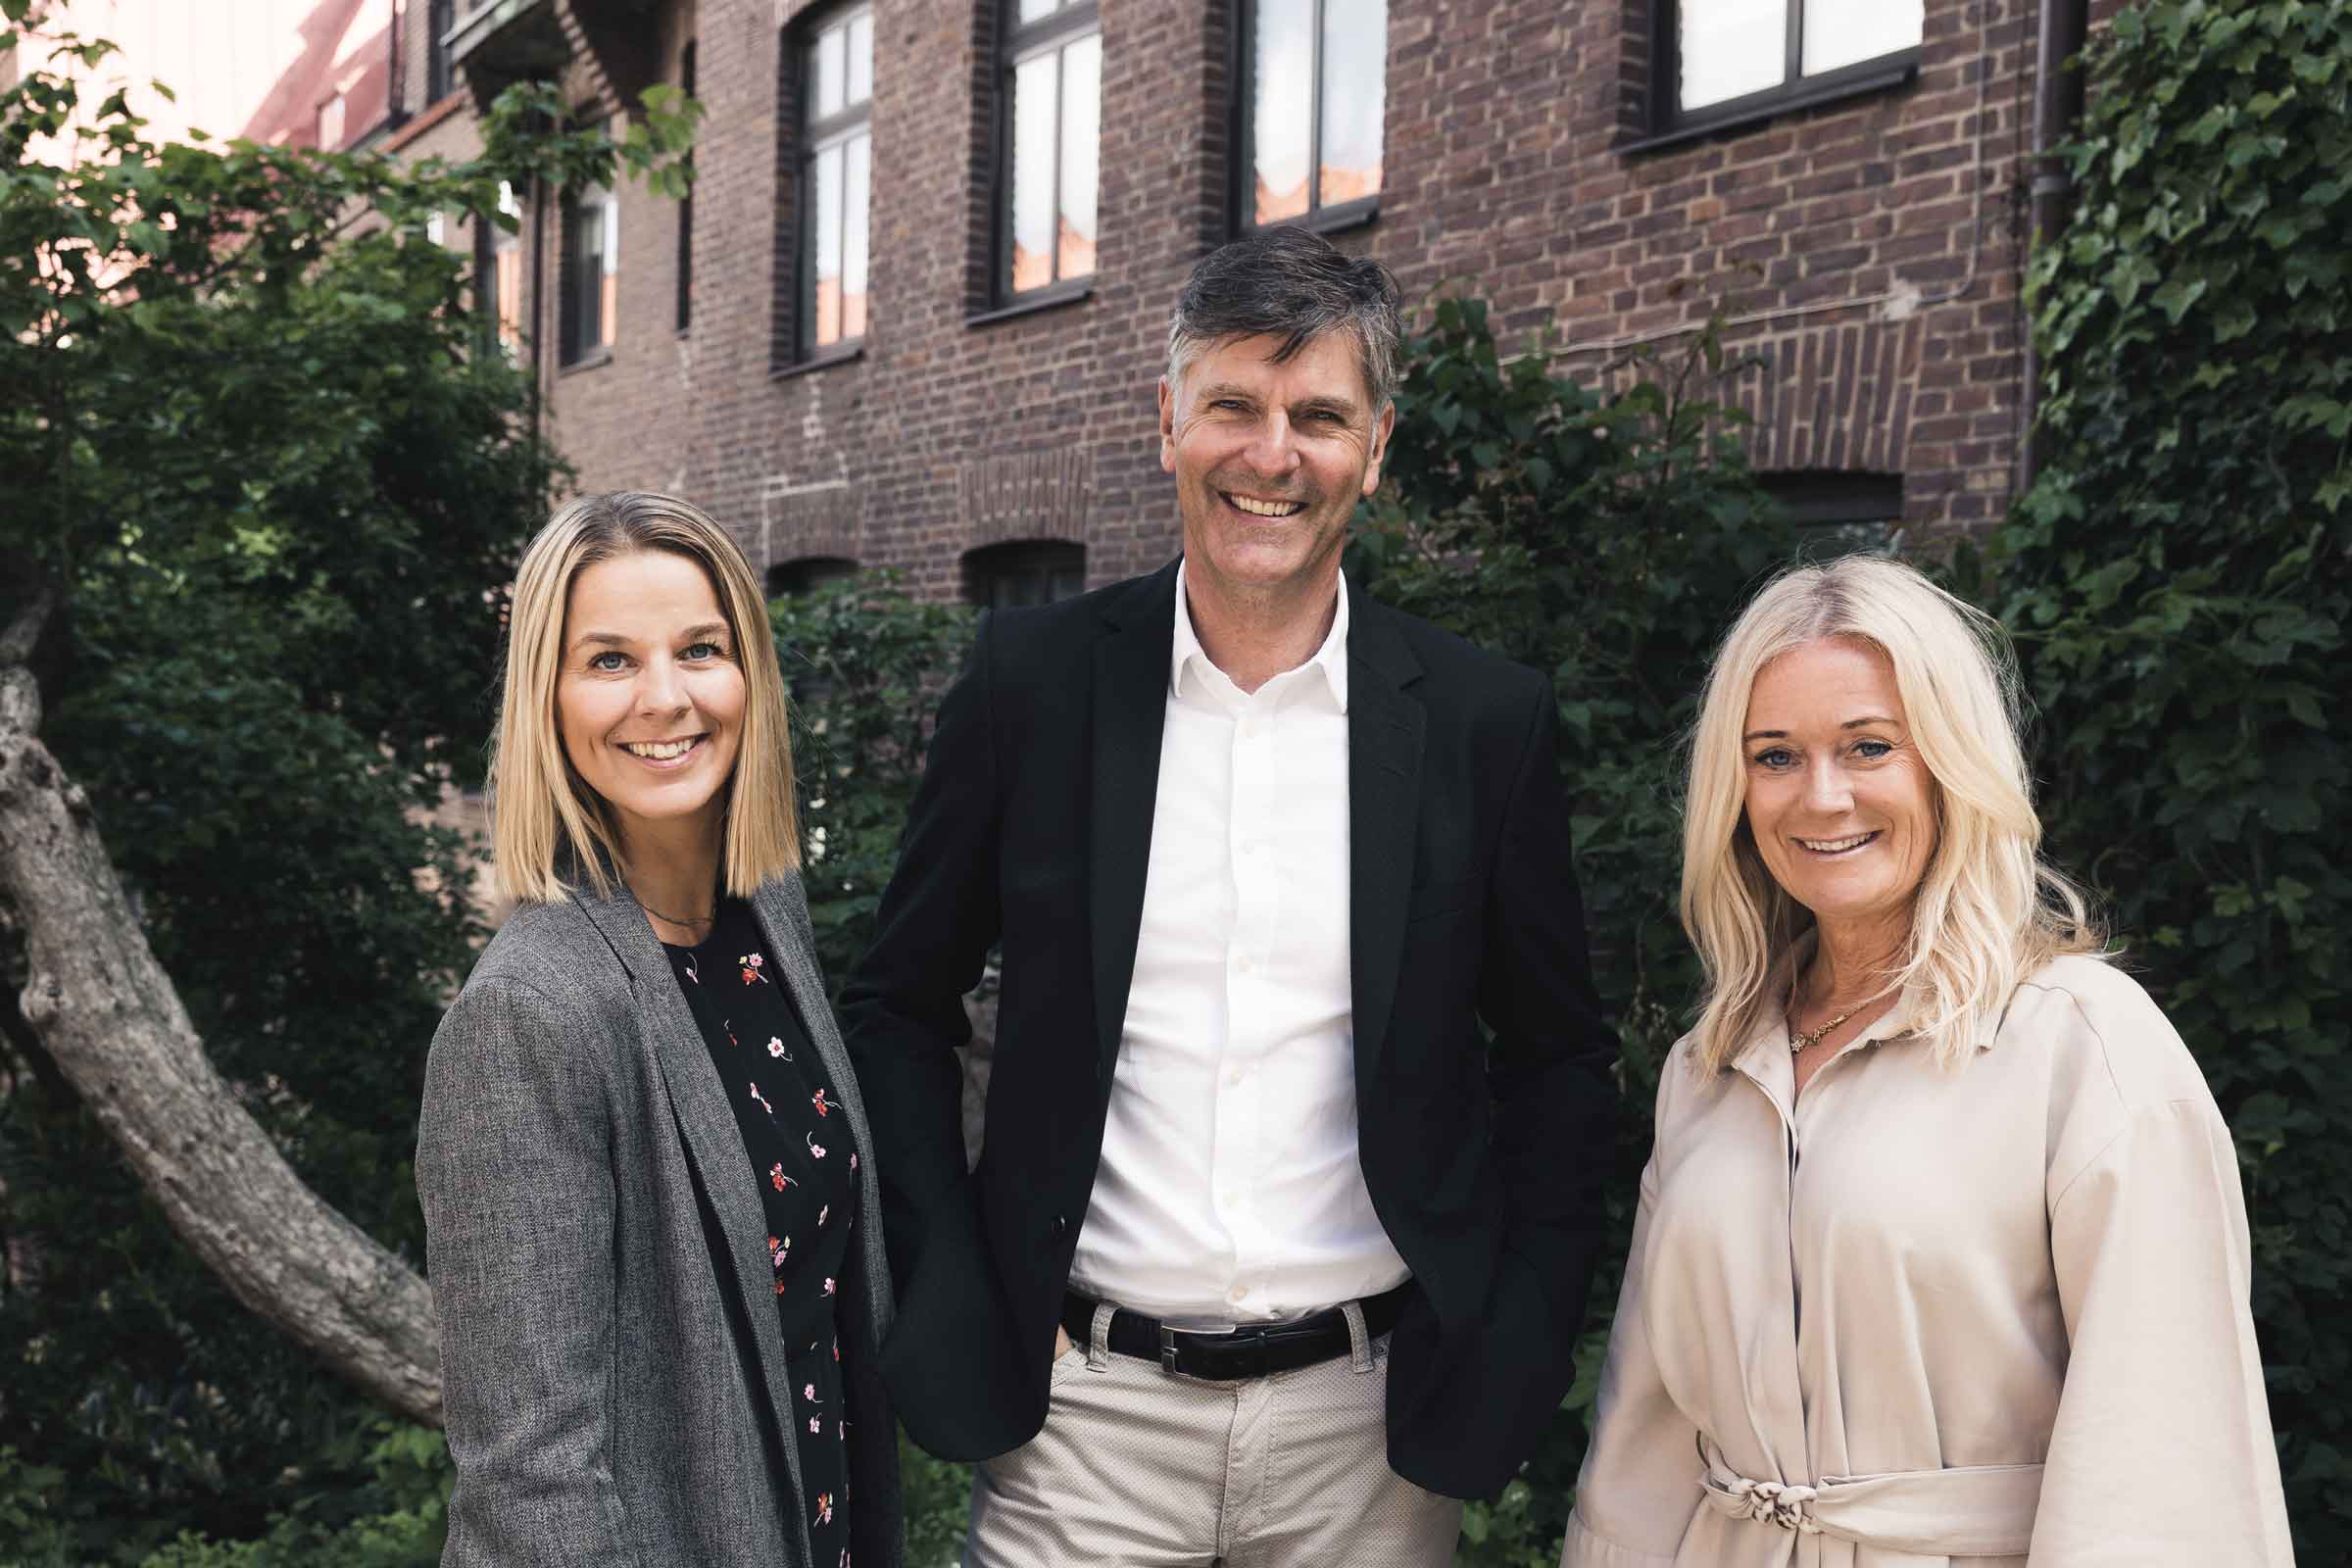 New Co-owner for Comactiva | Thomas Rösch concludes his involvement with the company | Linda Gårdlöv | Victoria H Kilstam